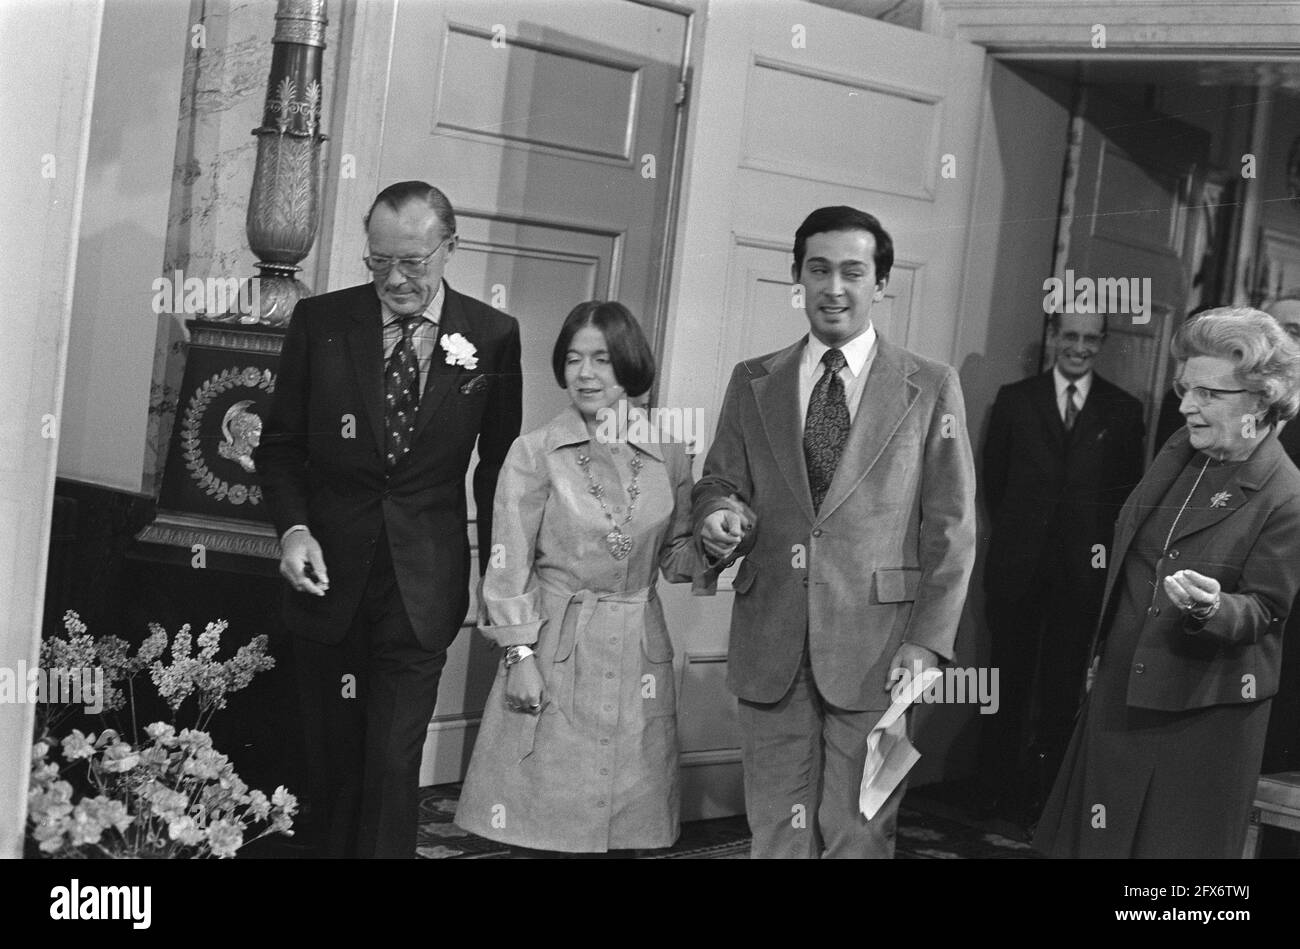 Prince Bernhard, Princess Christina, Jorge Guillermo and Queen Juliana present themselves to the press, February 14, 1975, queens, engagements, The Netherlands, 20th century press agency photo, news to remember, documentary, historic photography 1945-1990, visual stories, human history of the Twentieth Century, capturing moments in time Stock Photo